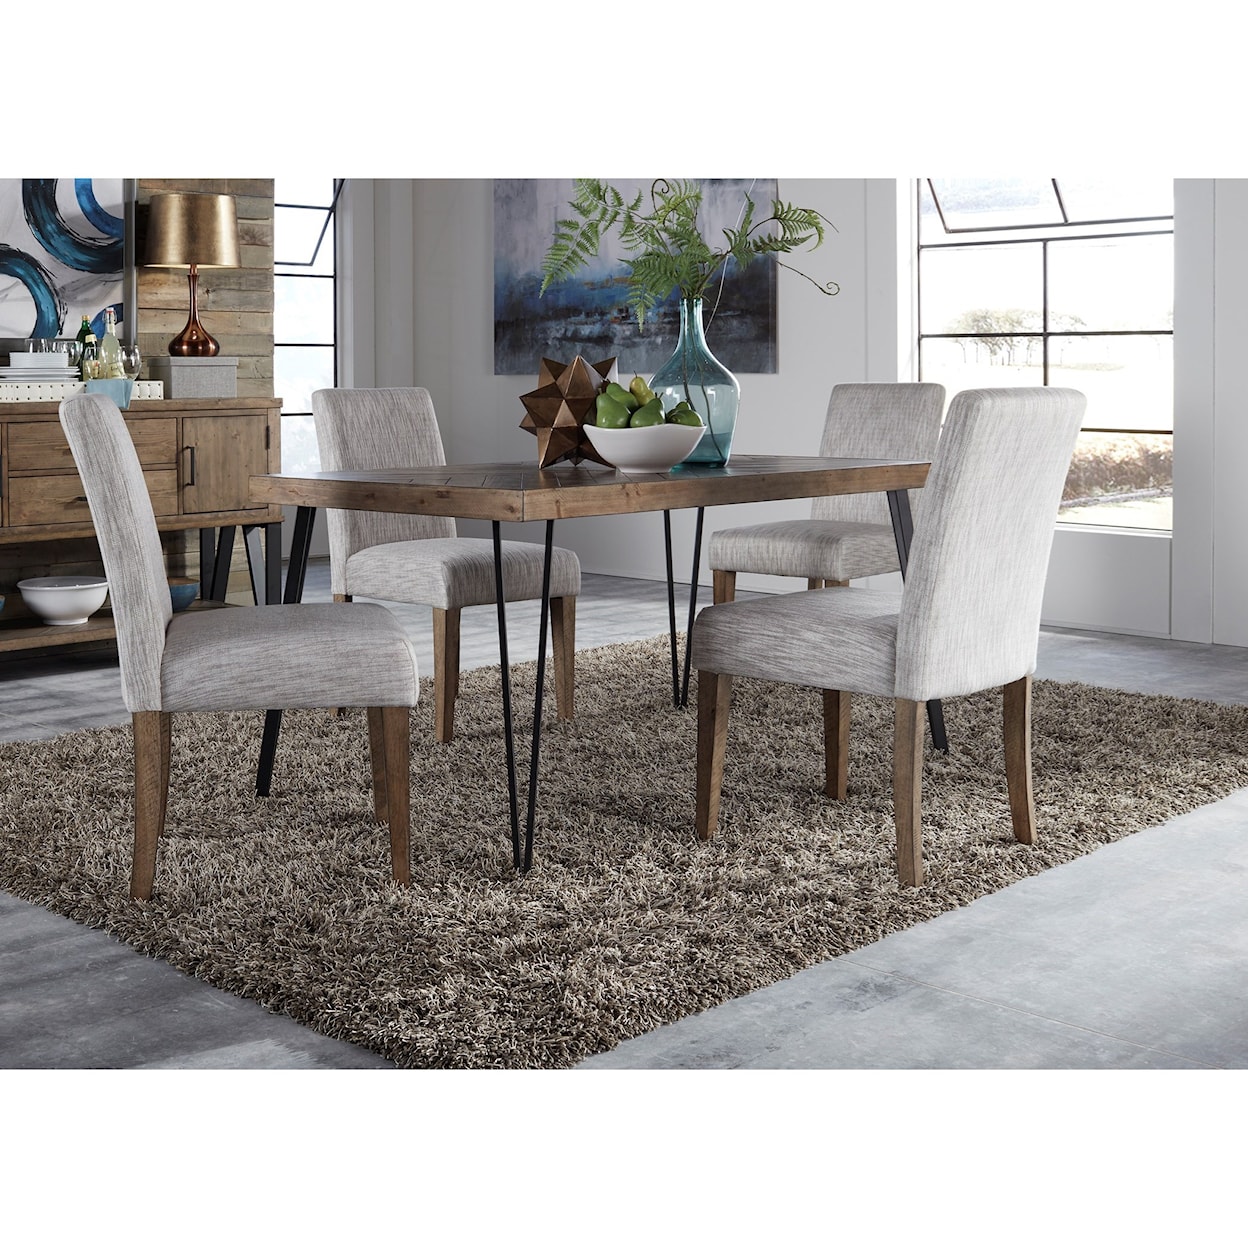 Libby Horizons Dining Table and Chair Set